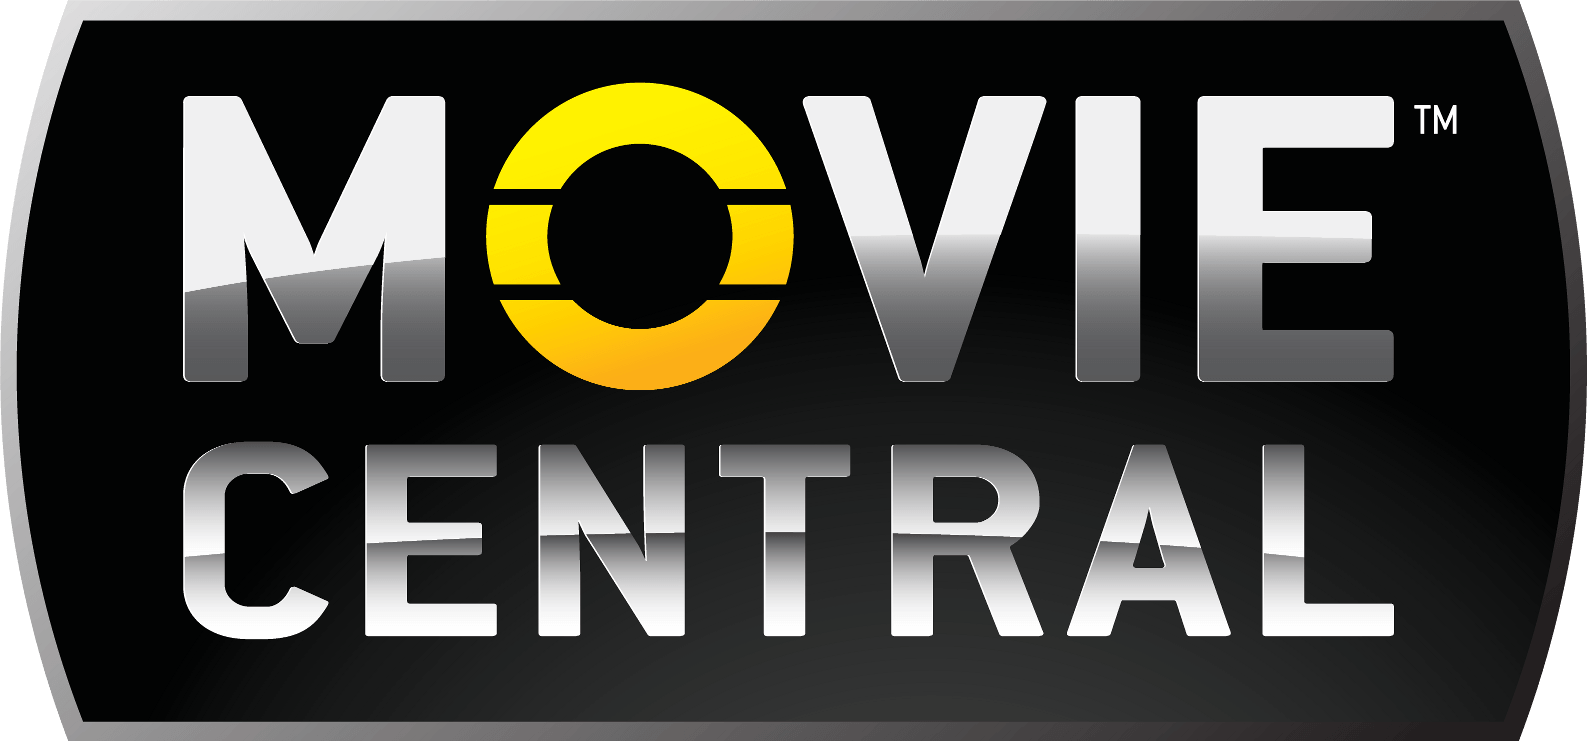 Movies Logo - Image - Movie Central.png | Logopedia | FANDOM powered by Wikia